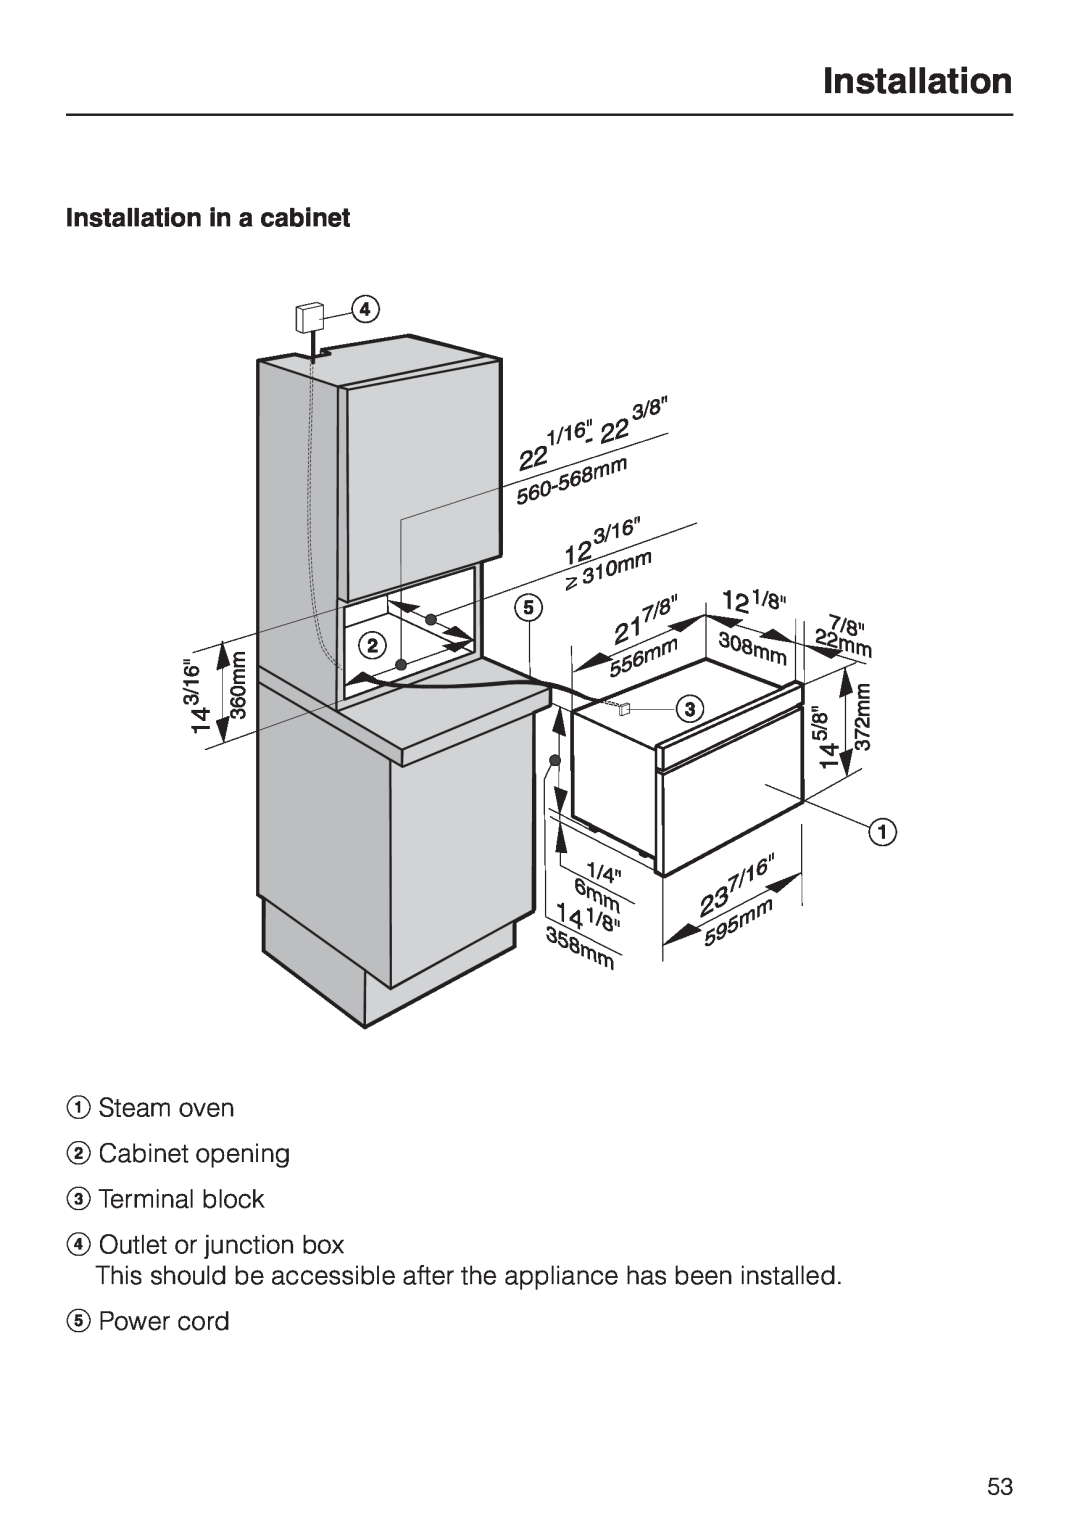 Miele DG 2661 installation instructions Installation in a cabinet 